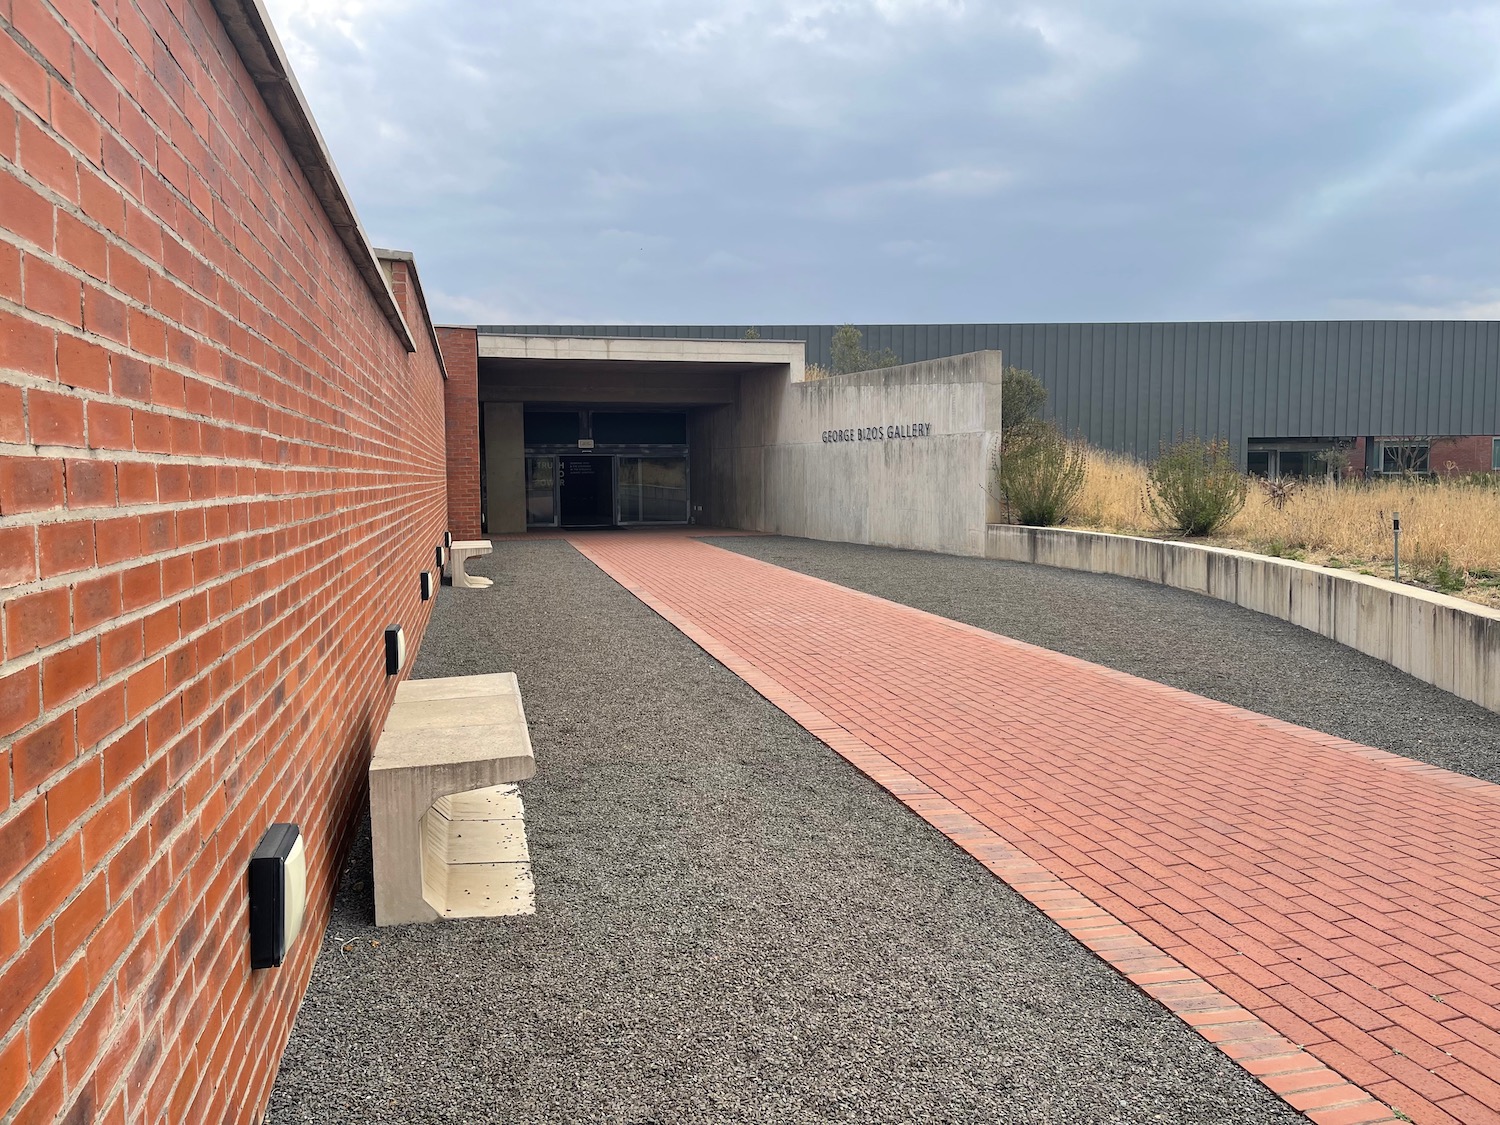 a brick walkway with a bench in front of a building